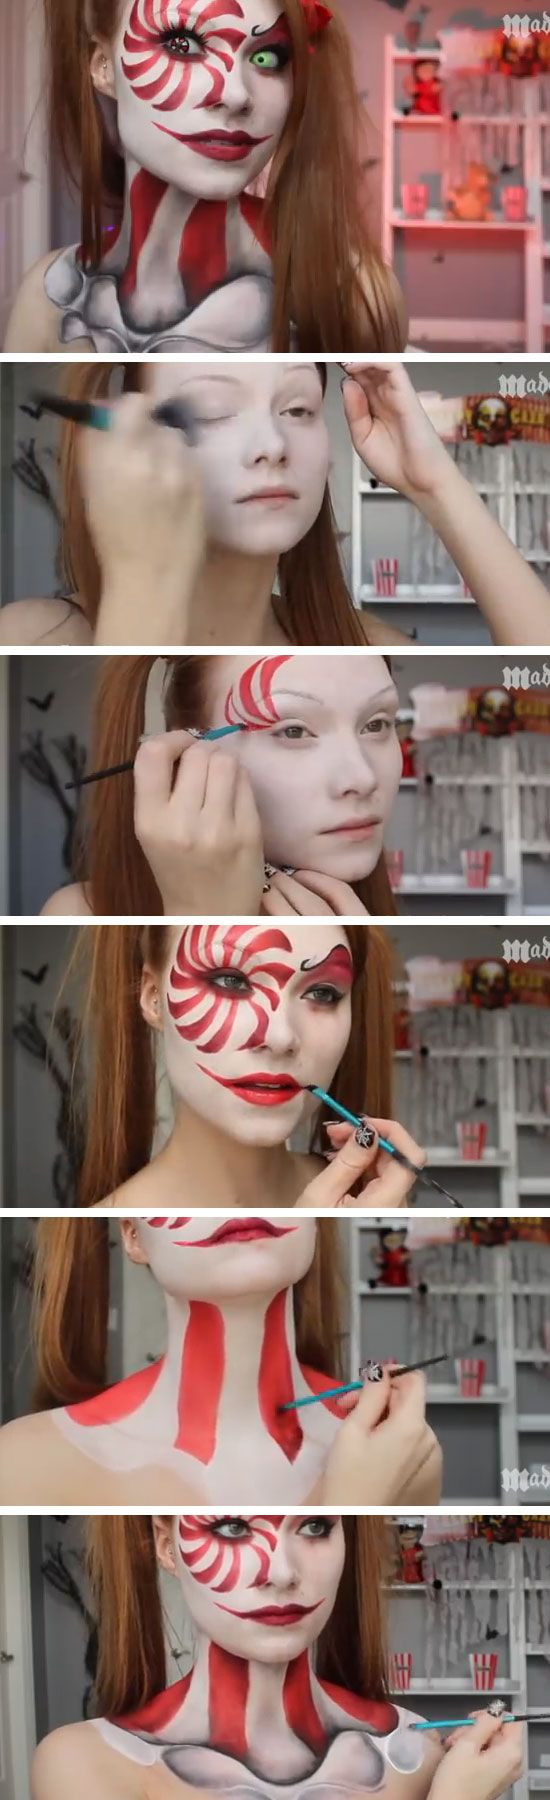 Easy DIY Costumes For Women
 25 Super Cool Step by Step Makeup Tutorials for Halloween